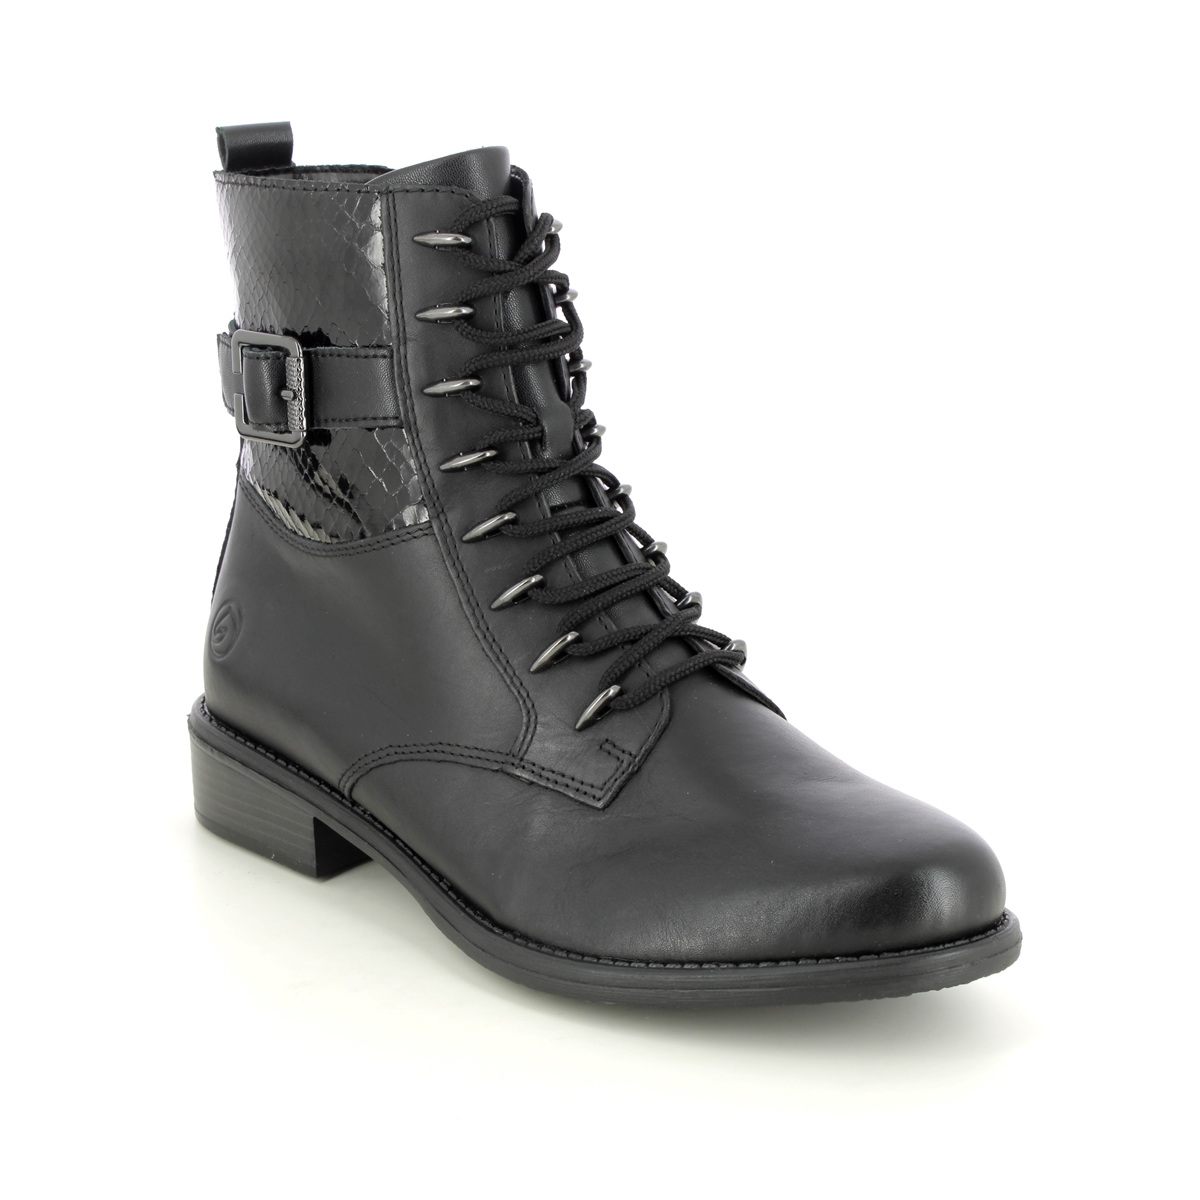 Remonte Peechlace Black Leather Womens Lace Up Boots D0F72-01 In Size 38 In Plain Black Leather